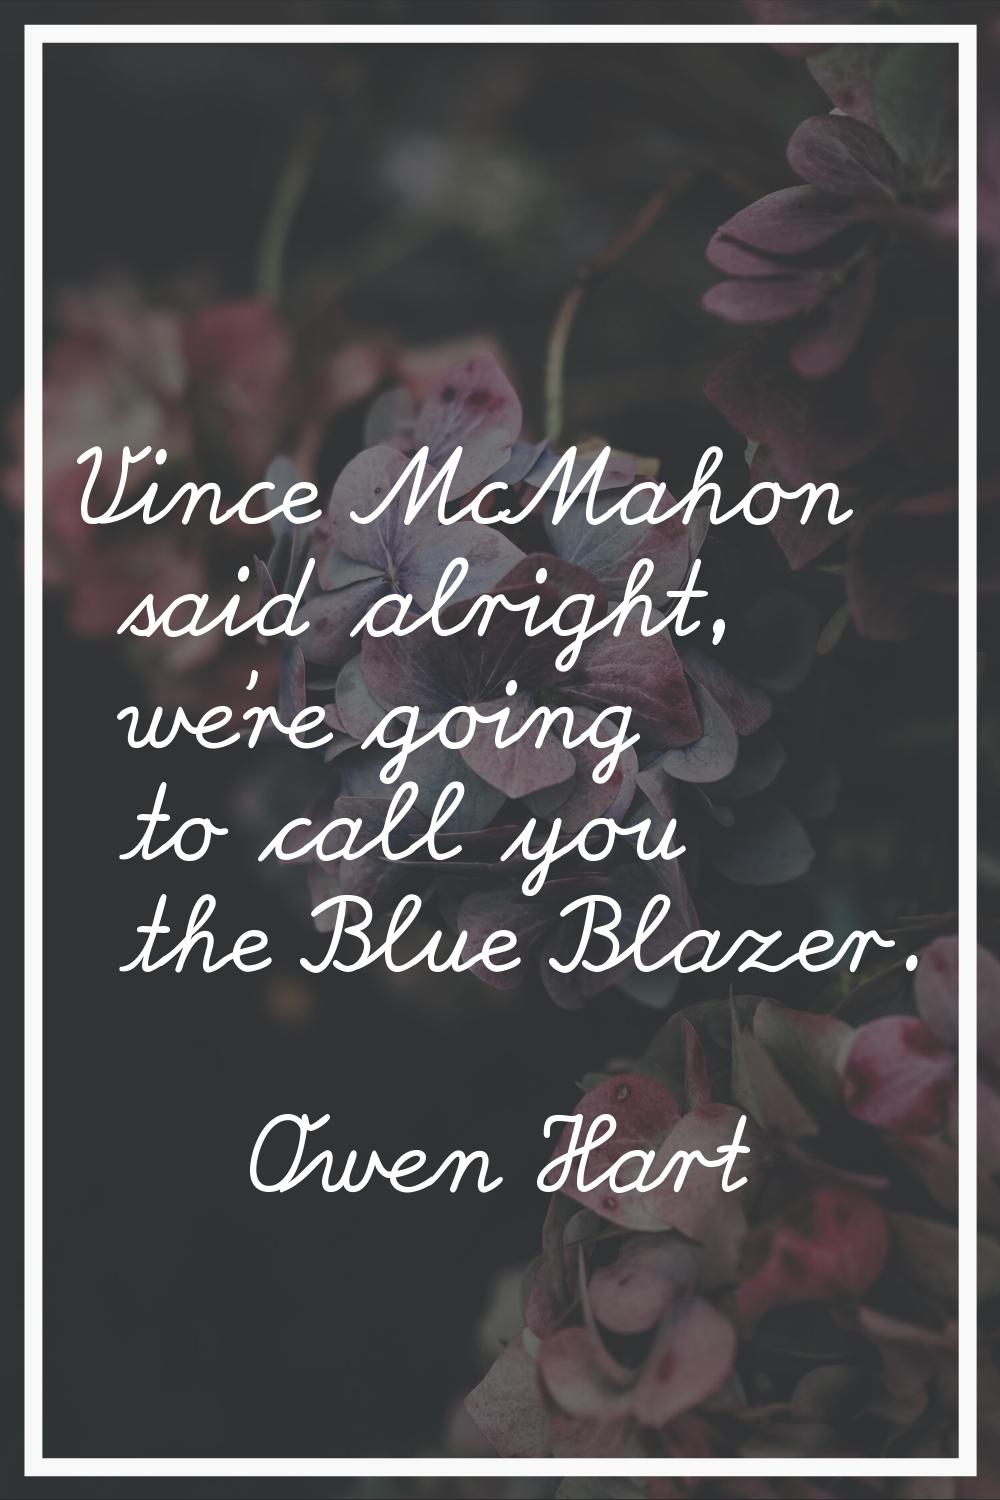 Vince McMahon said alright, we're going to call you the Blue Blazer.